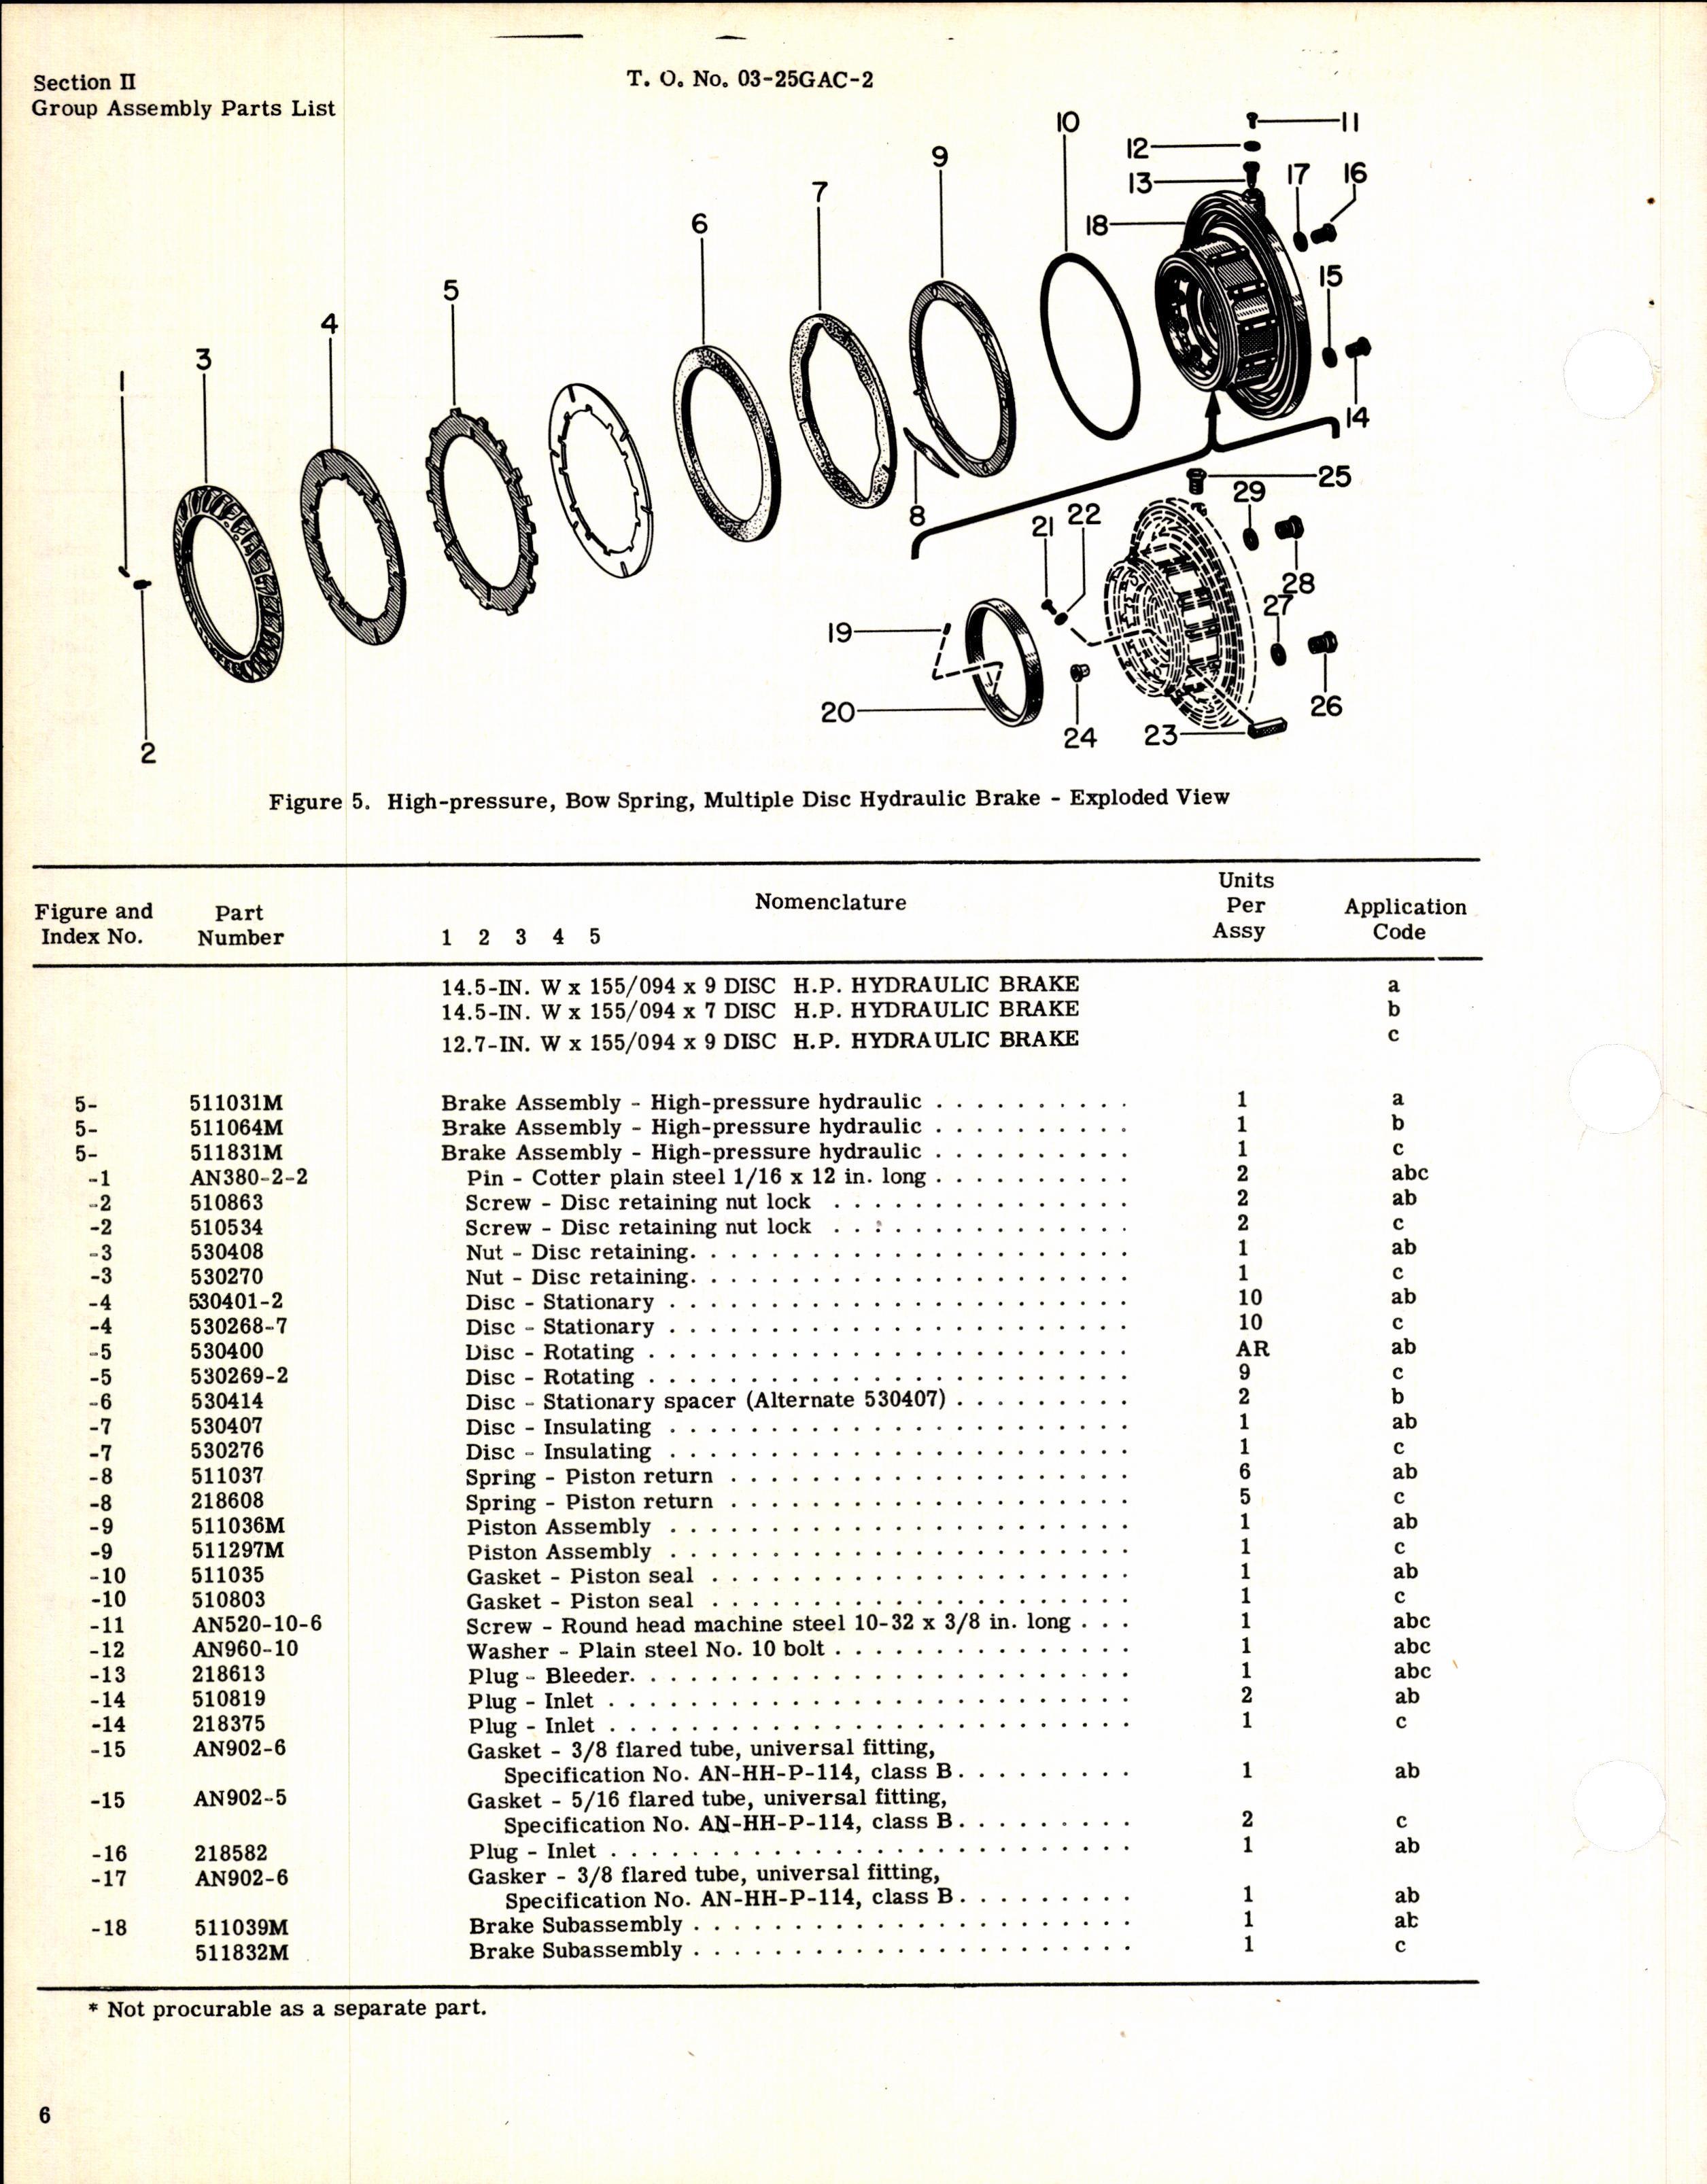 Sample page 10 from AirCorps Library document: Parts Catalog  for Multiple Disk Brakes (Goodyear)